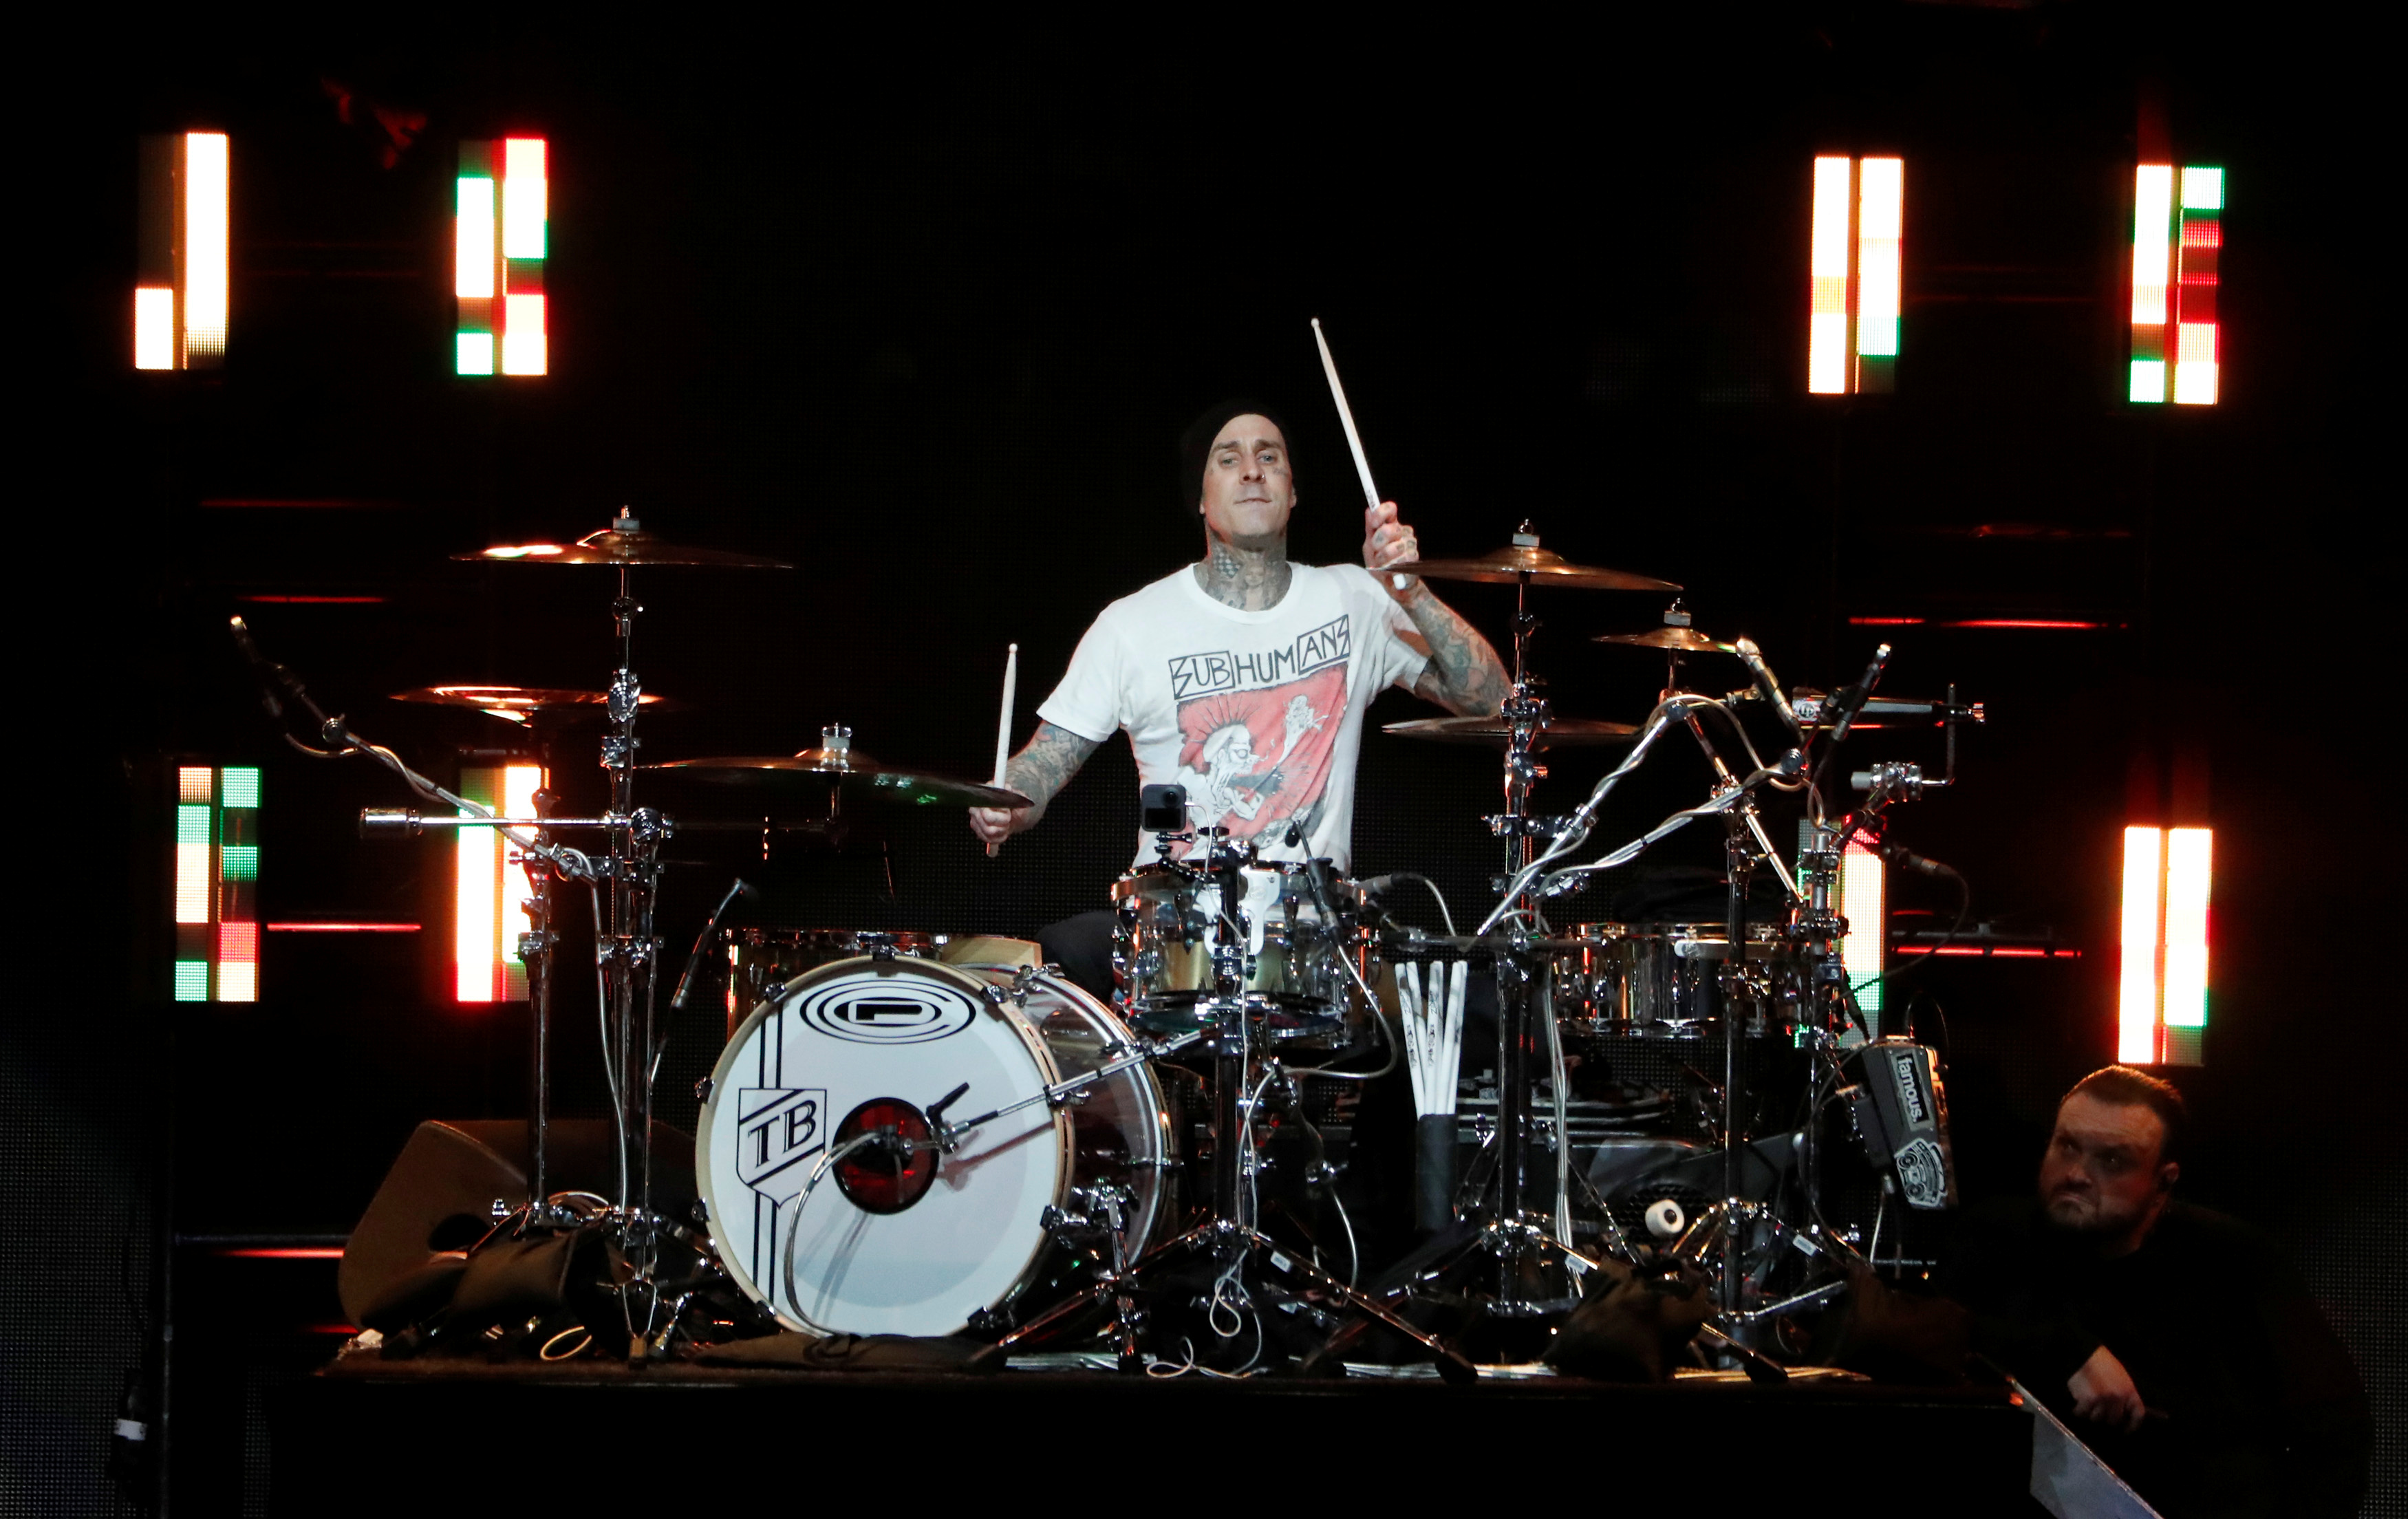 Travis Barker of Blink-182 performs during iHeartRadio's ALTer EGO concert at The Forum in Inglewood, California, U.S., January 18, 2020. REUTERS/Mario Anzuoni